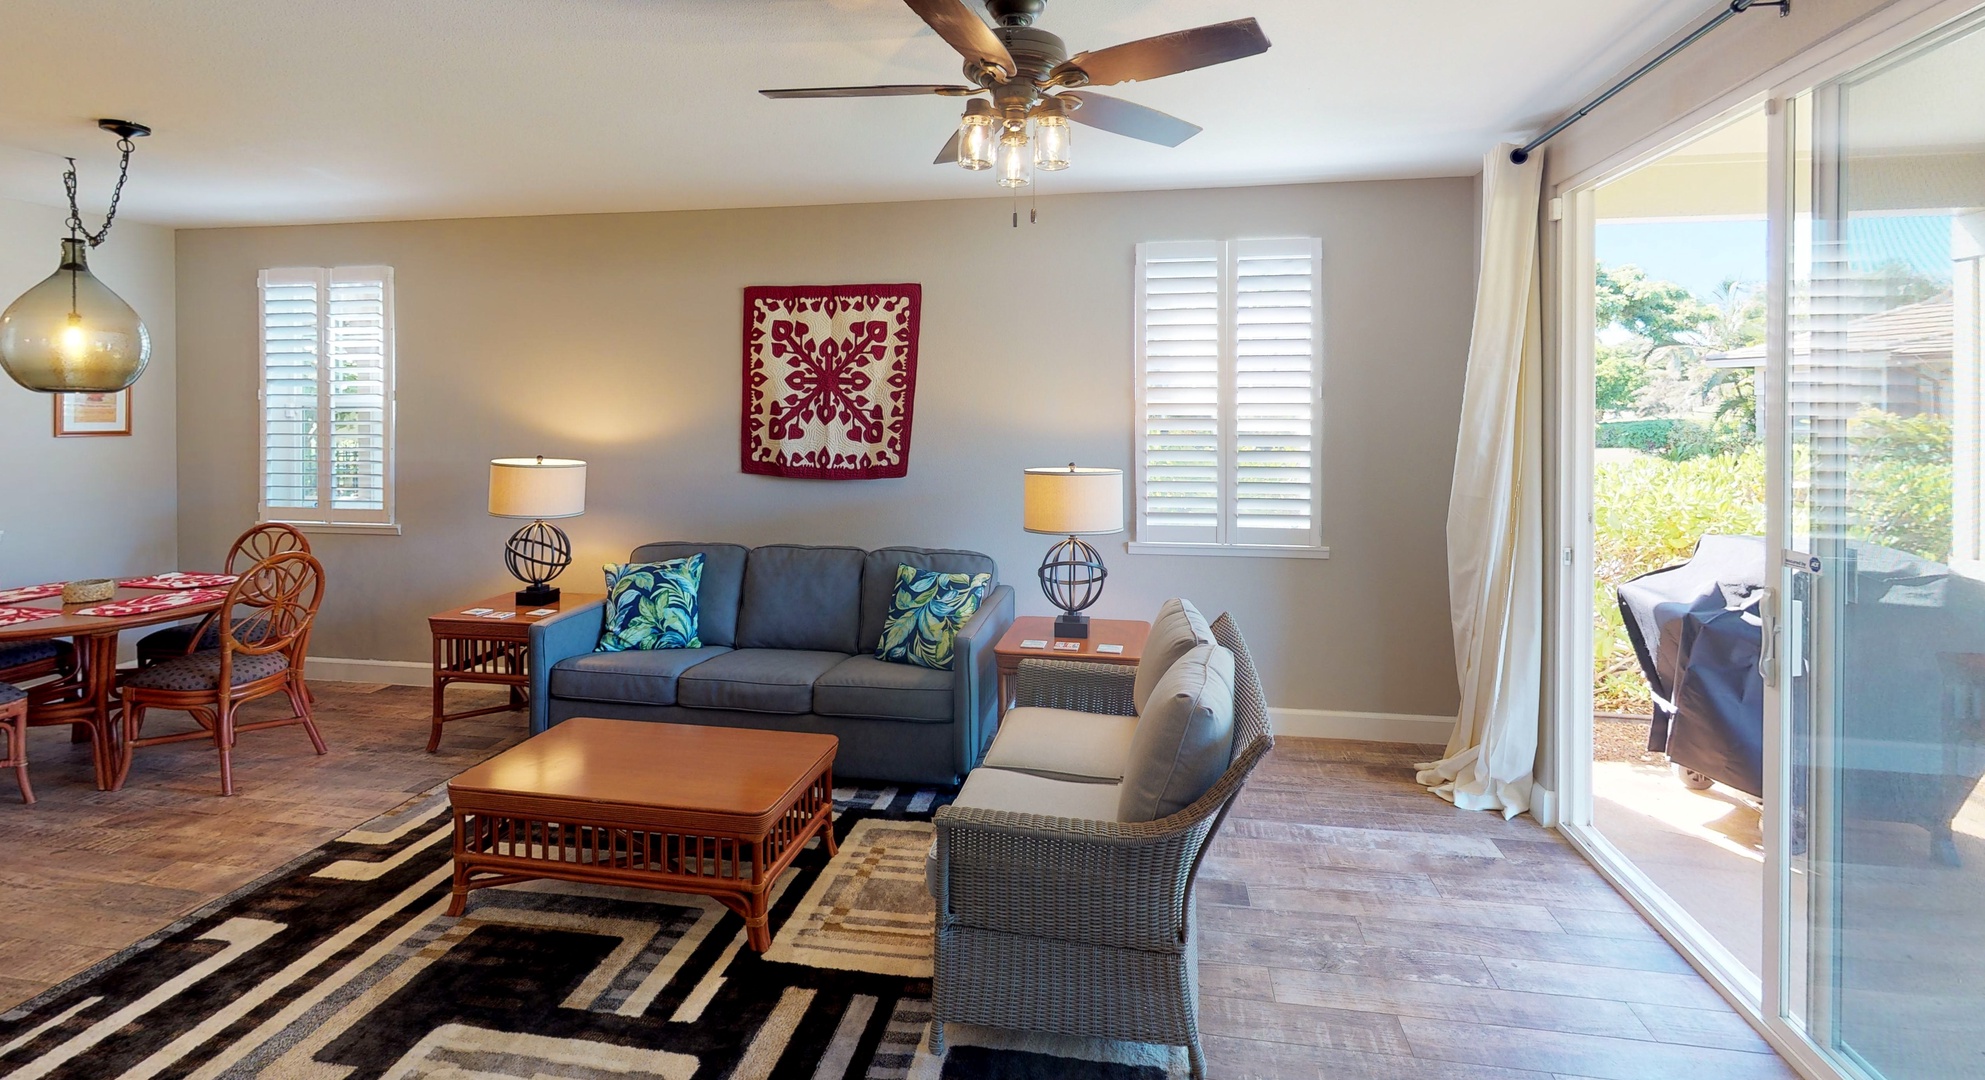 Kapolei Vacation Rentals, Ko Olina Kai 1051A - Breathe in island air from the lanai and curl up with a book.